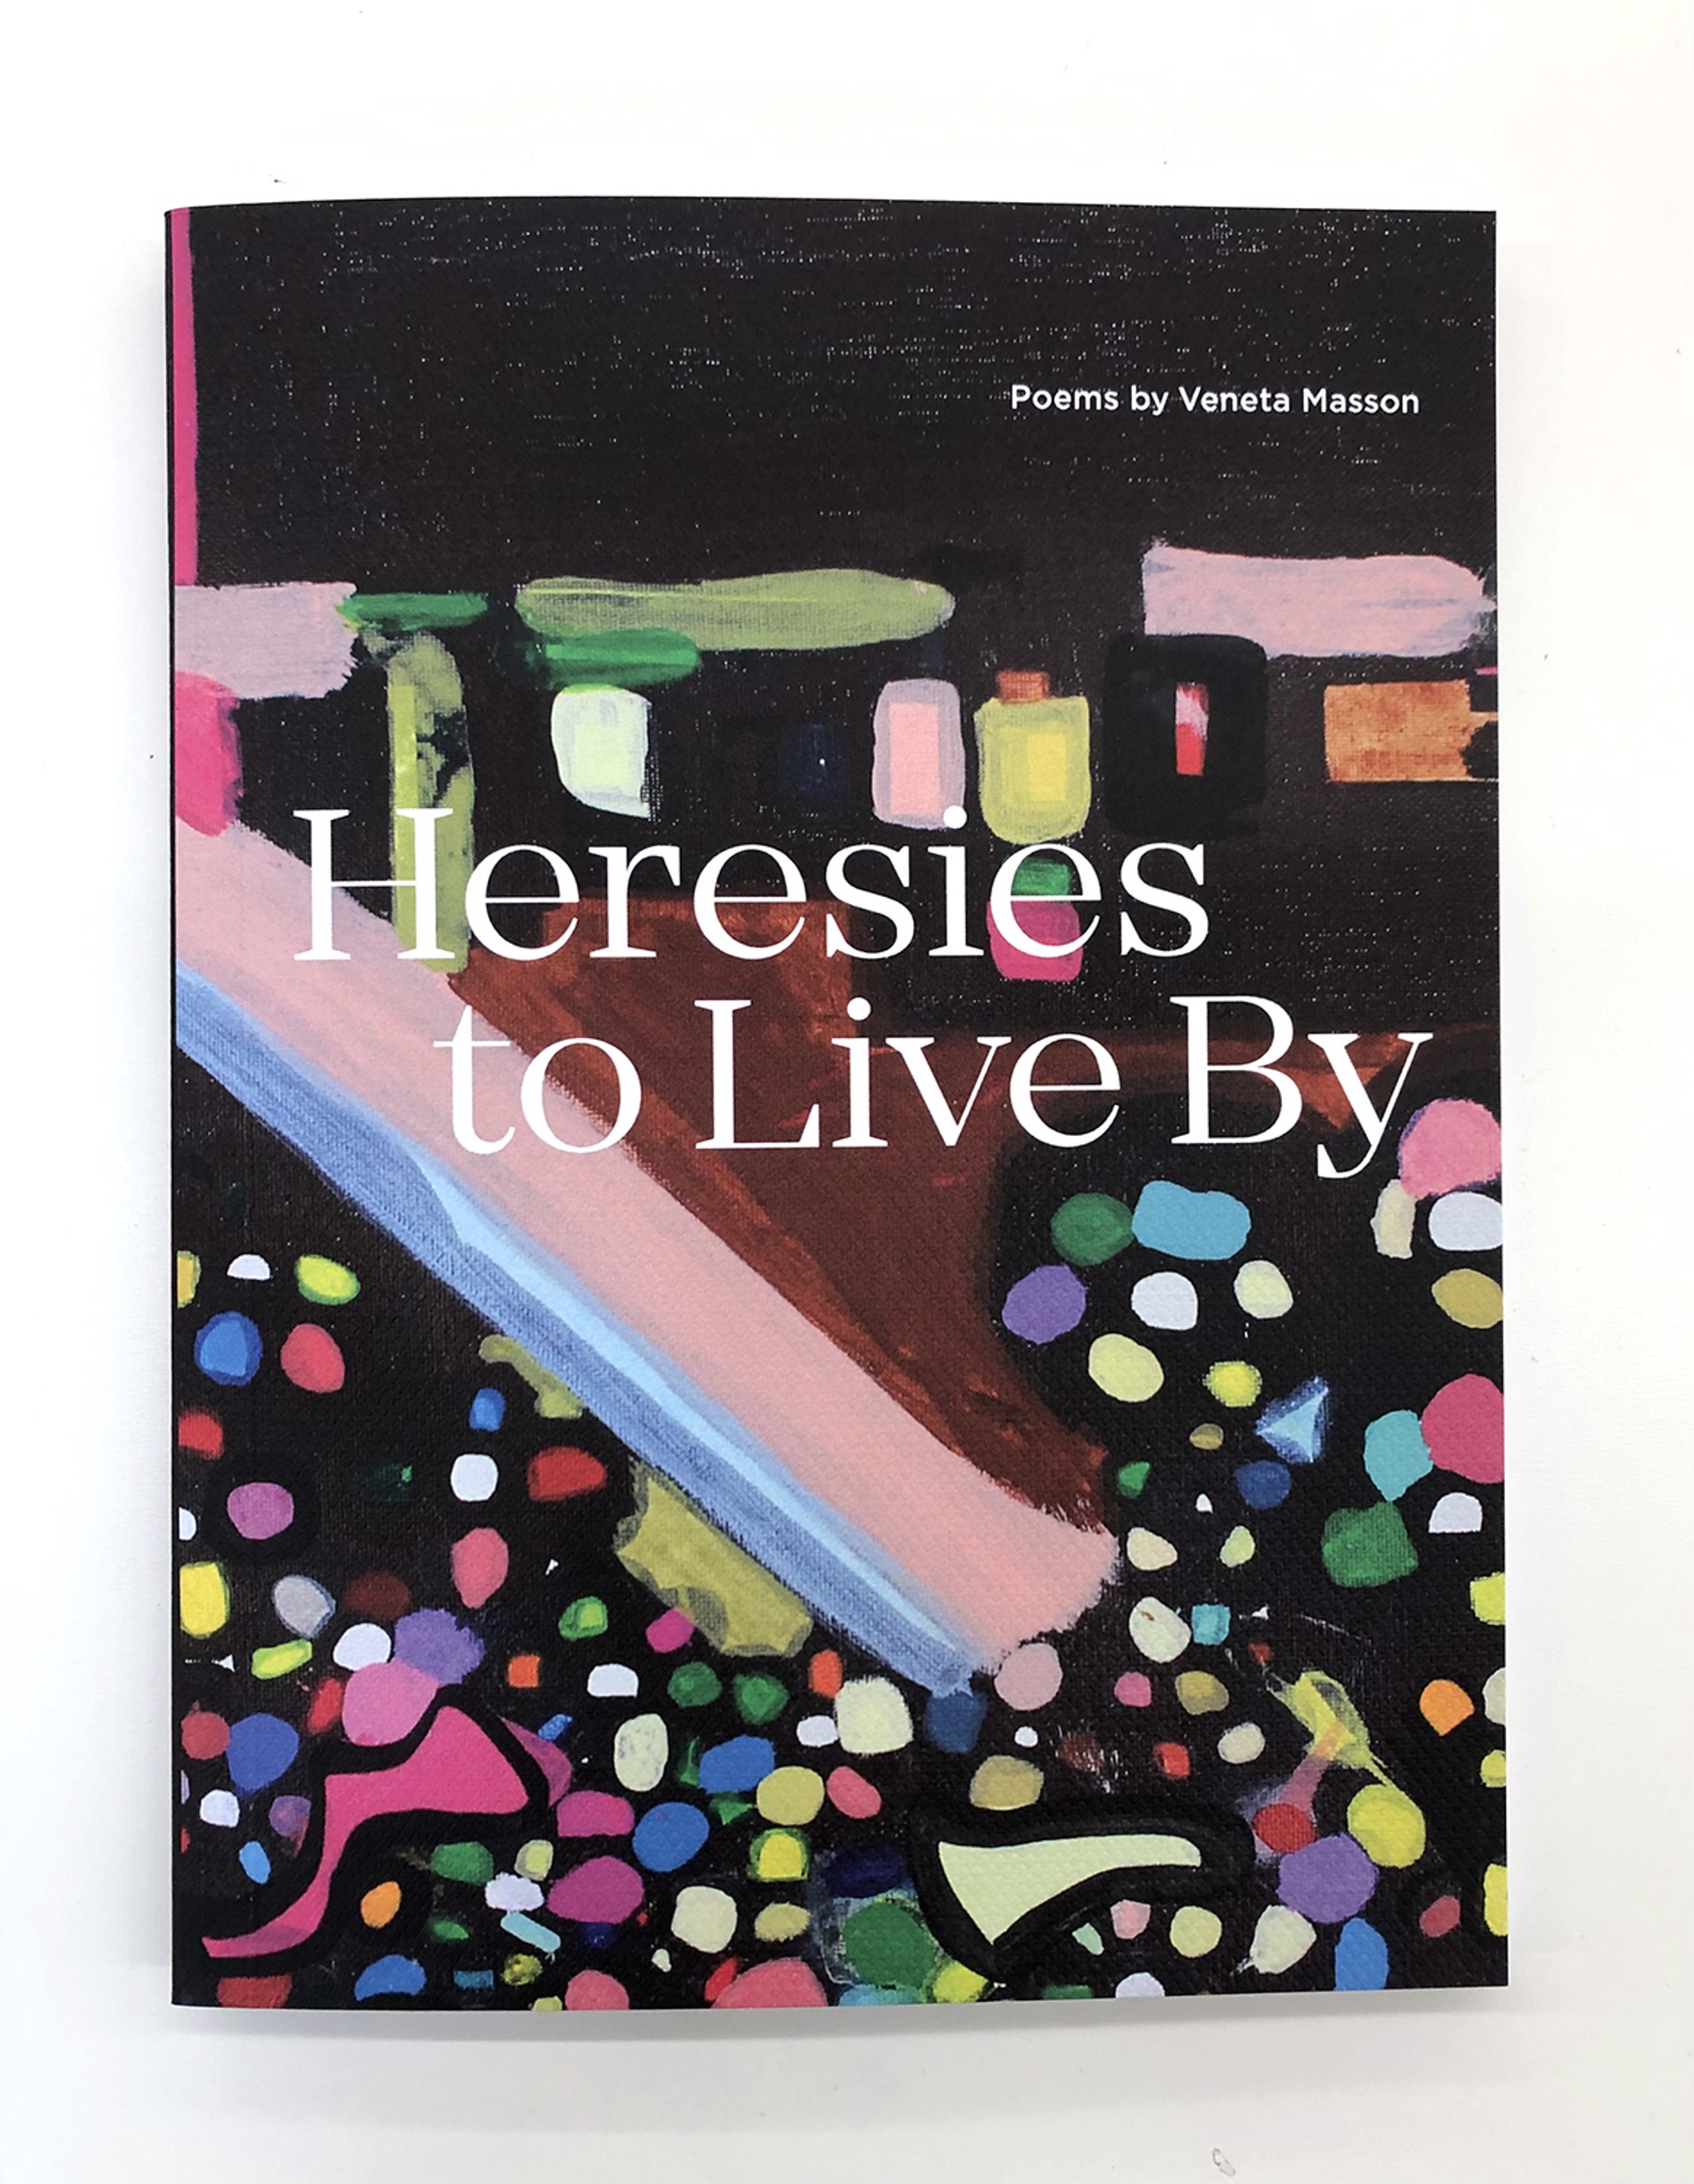 Heresies to Live by - Poetry Book by Veneta Masson by Art Enables Merchandise